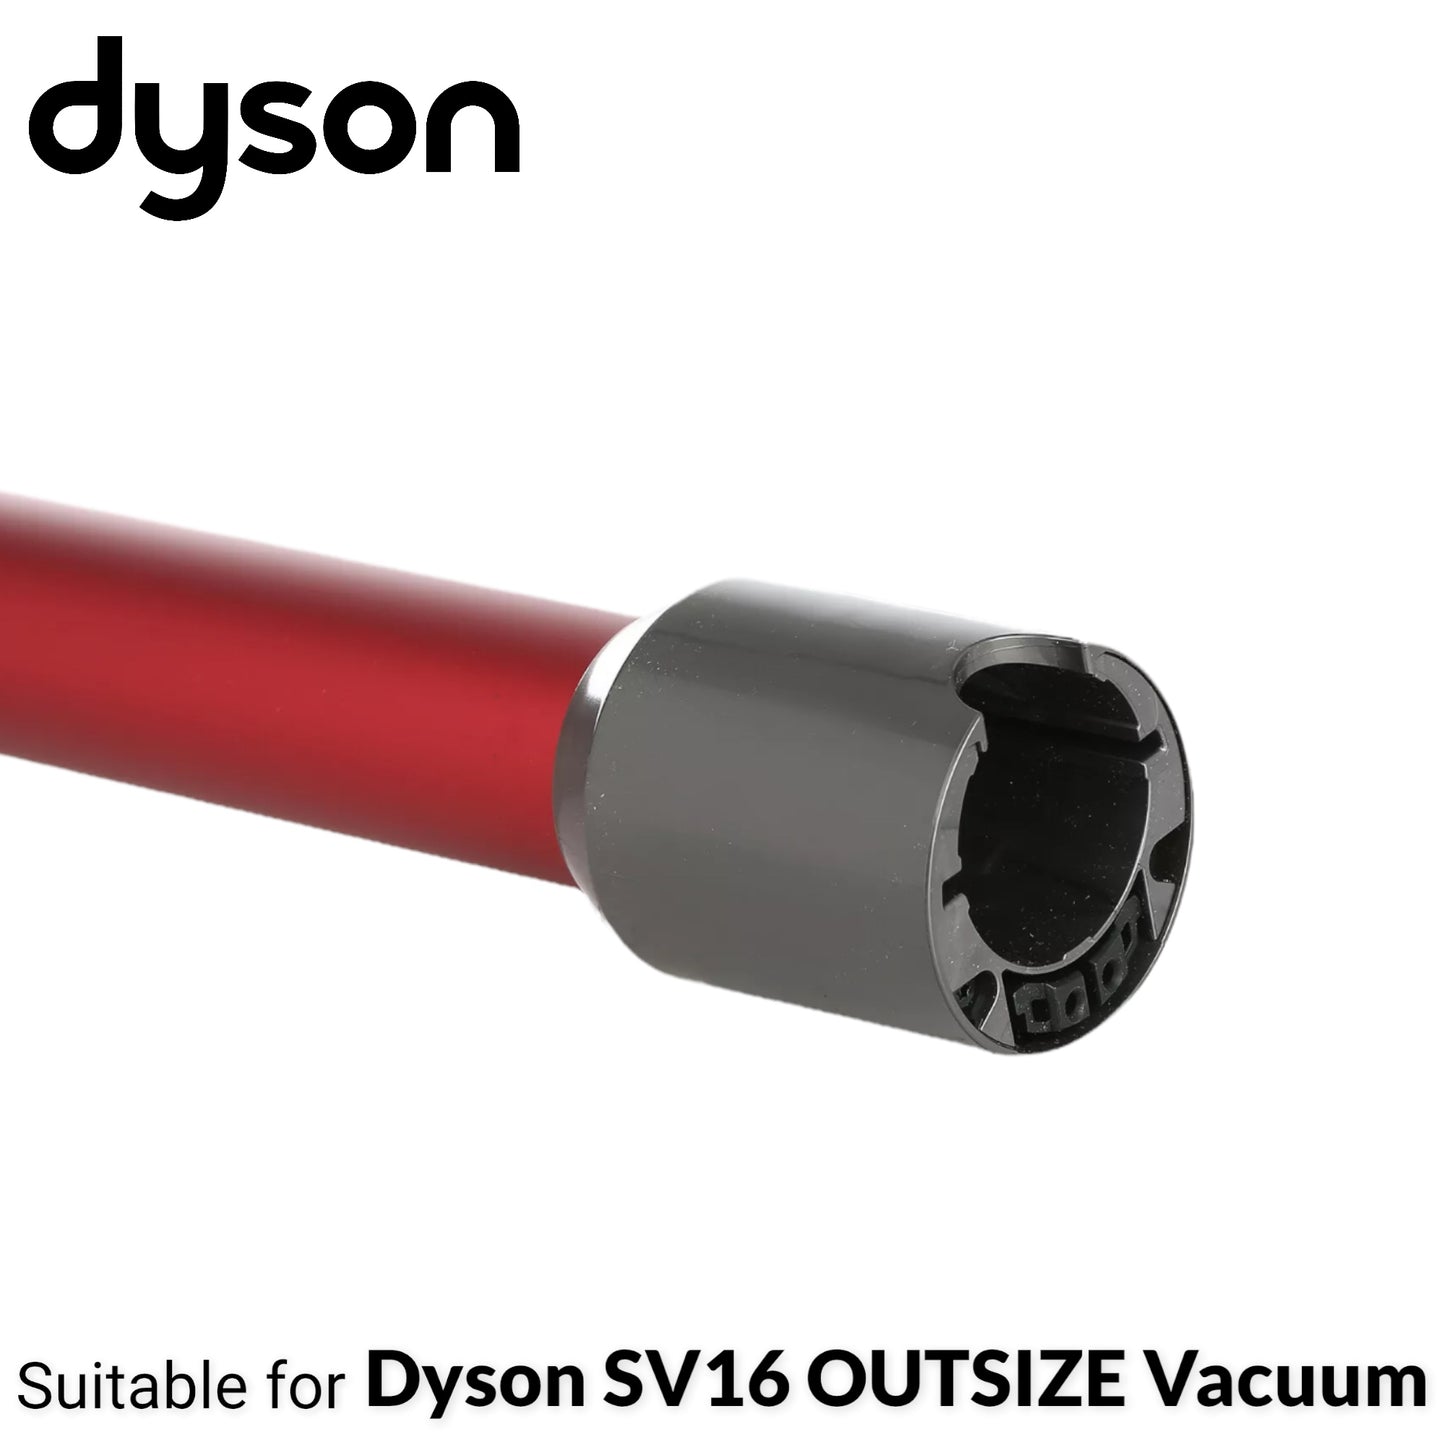 New Genuine Dyson OUTSIZE V11 SV16 Vacuum Quick Release Wand Tube Assembly - Red